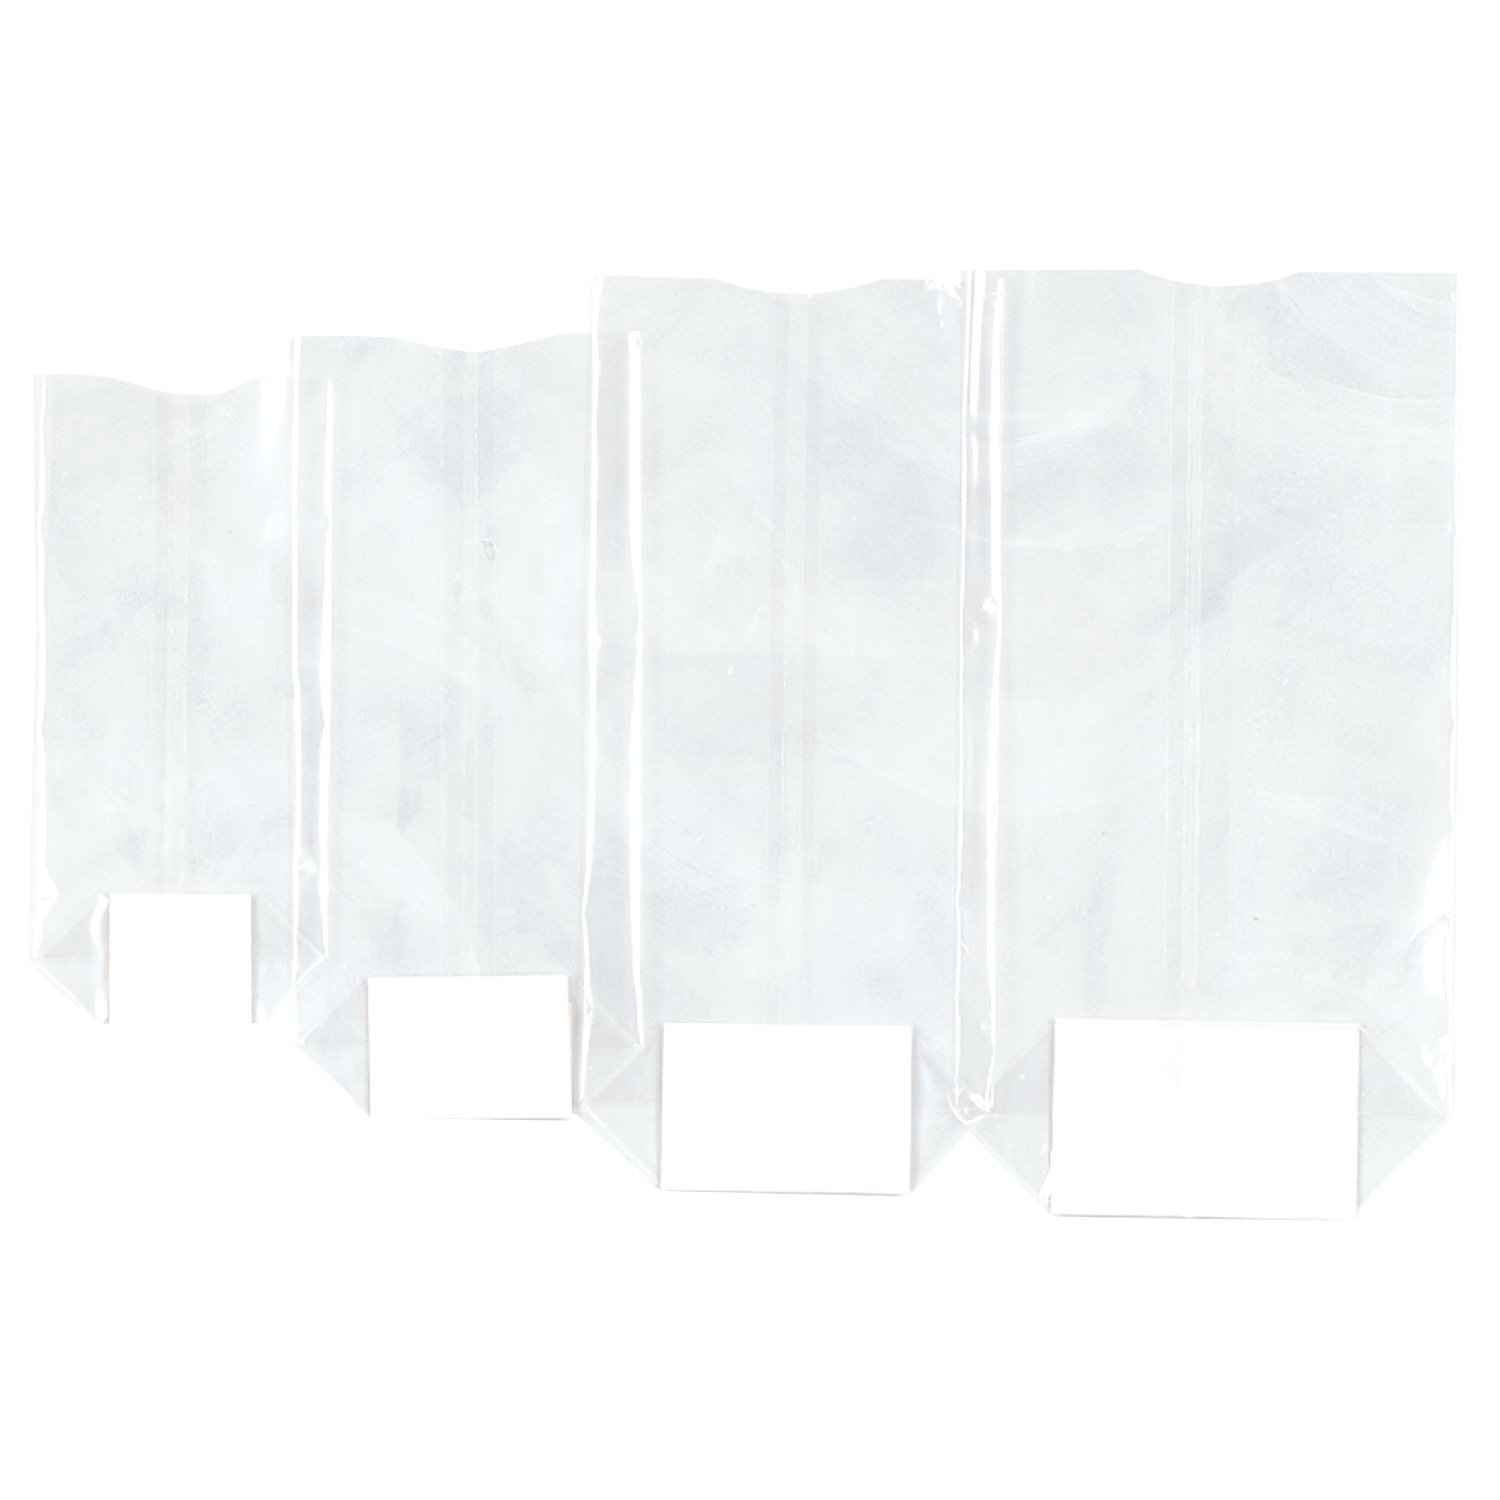 Clear block bottomed cello bags - 120 x 275mm - 100pcs